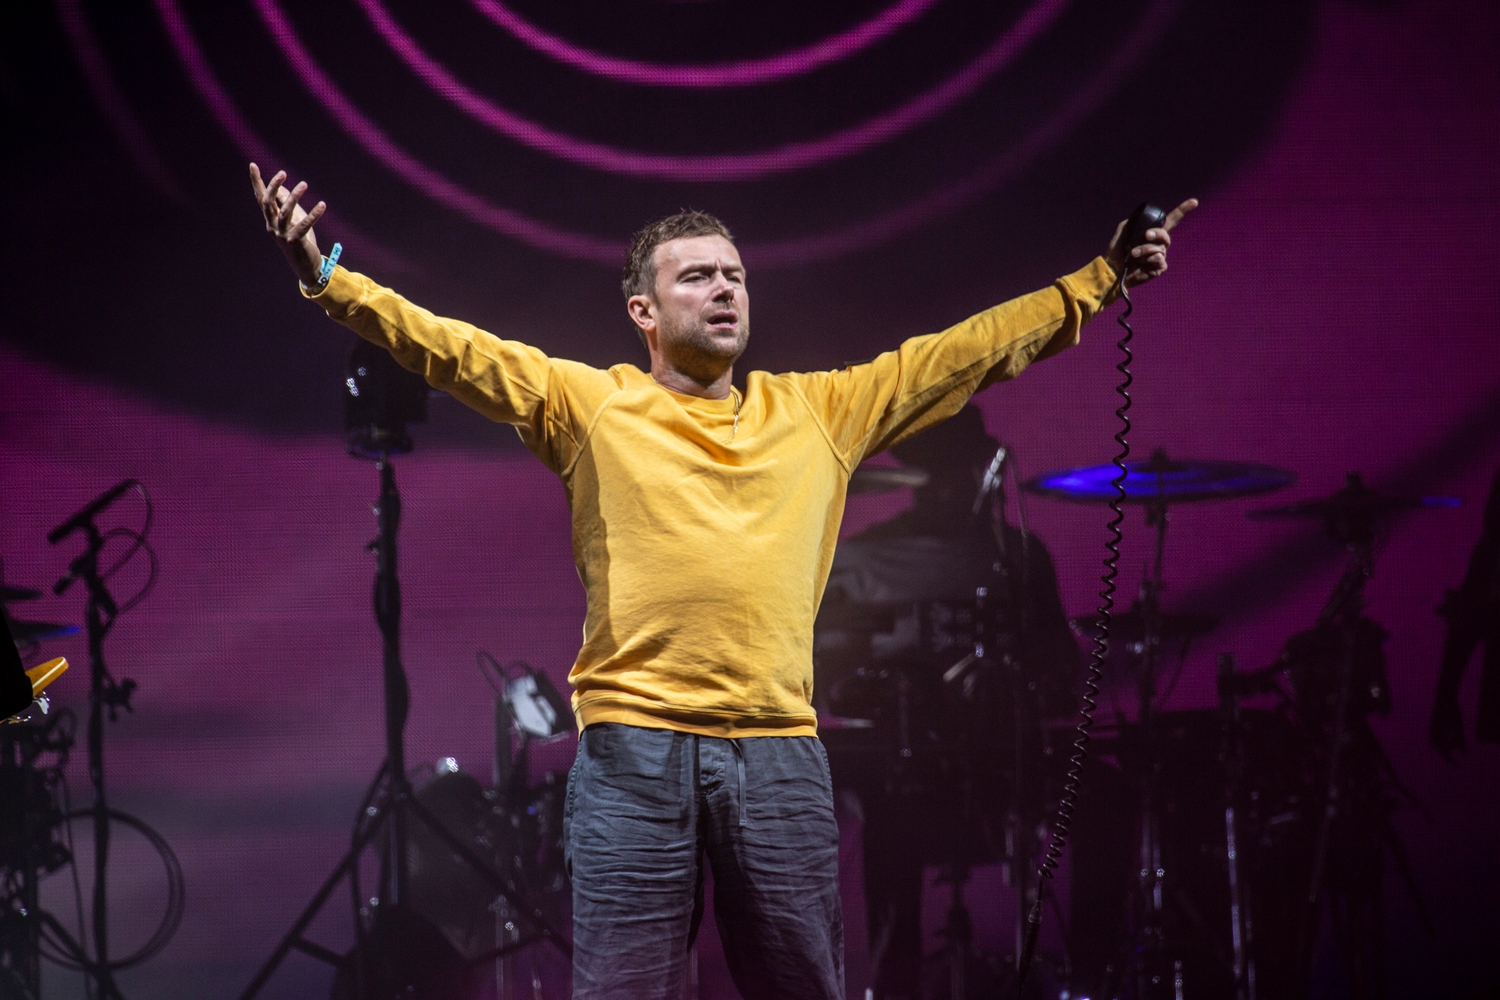 Gorillaz, Brockhampton, Nils Frahm and more kick off an eclectic first day at Lowlands 2018